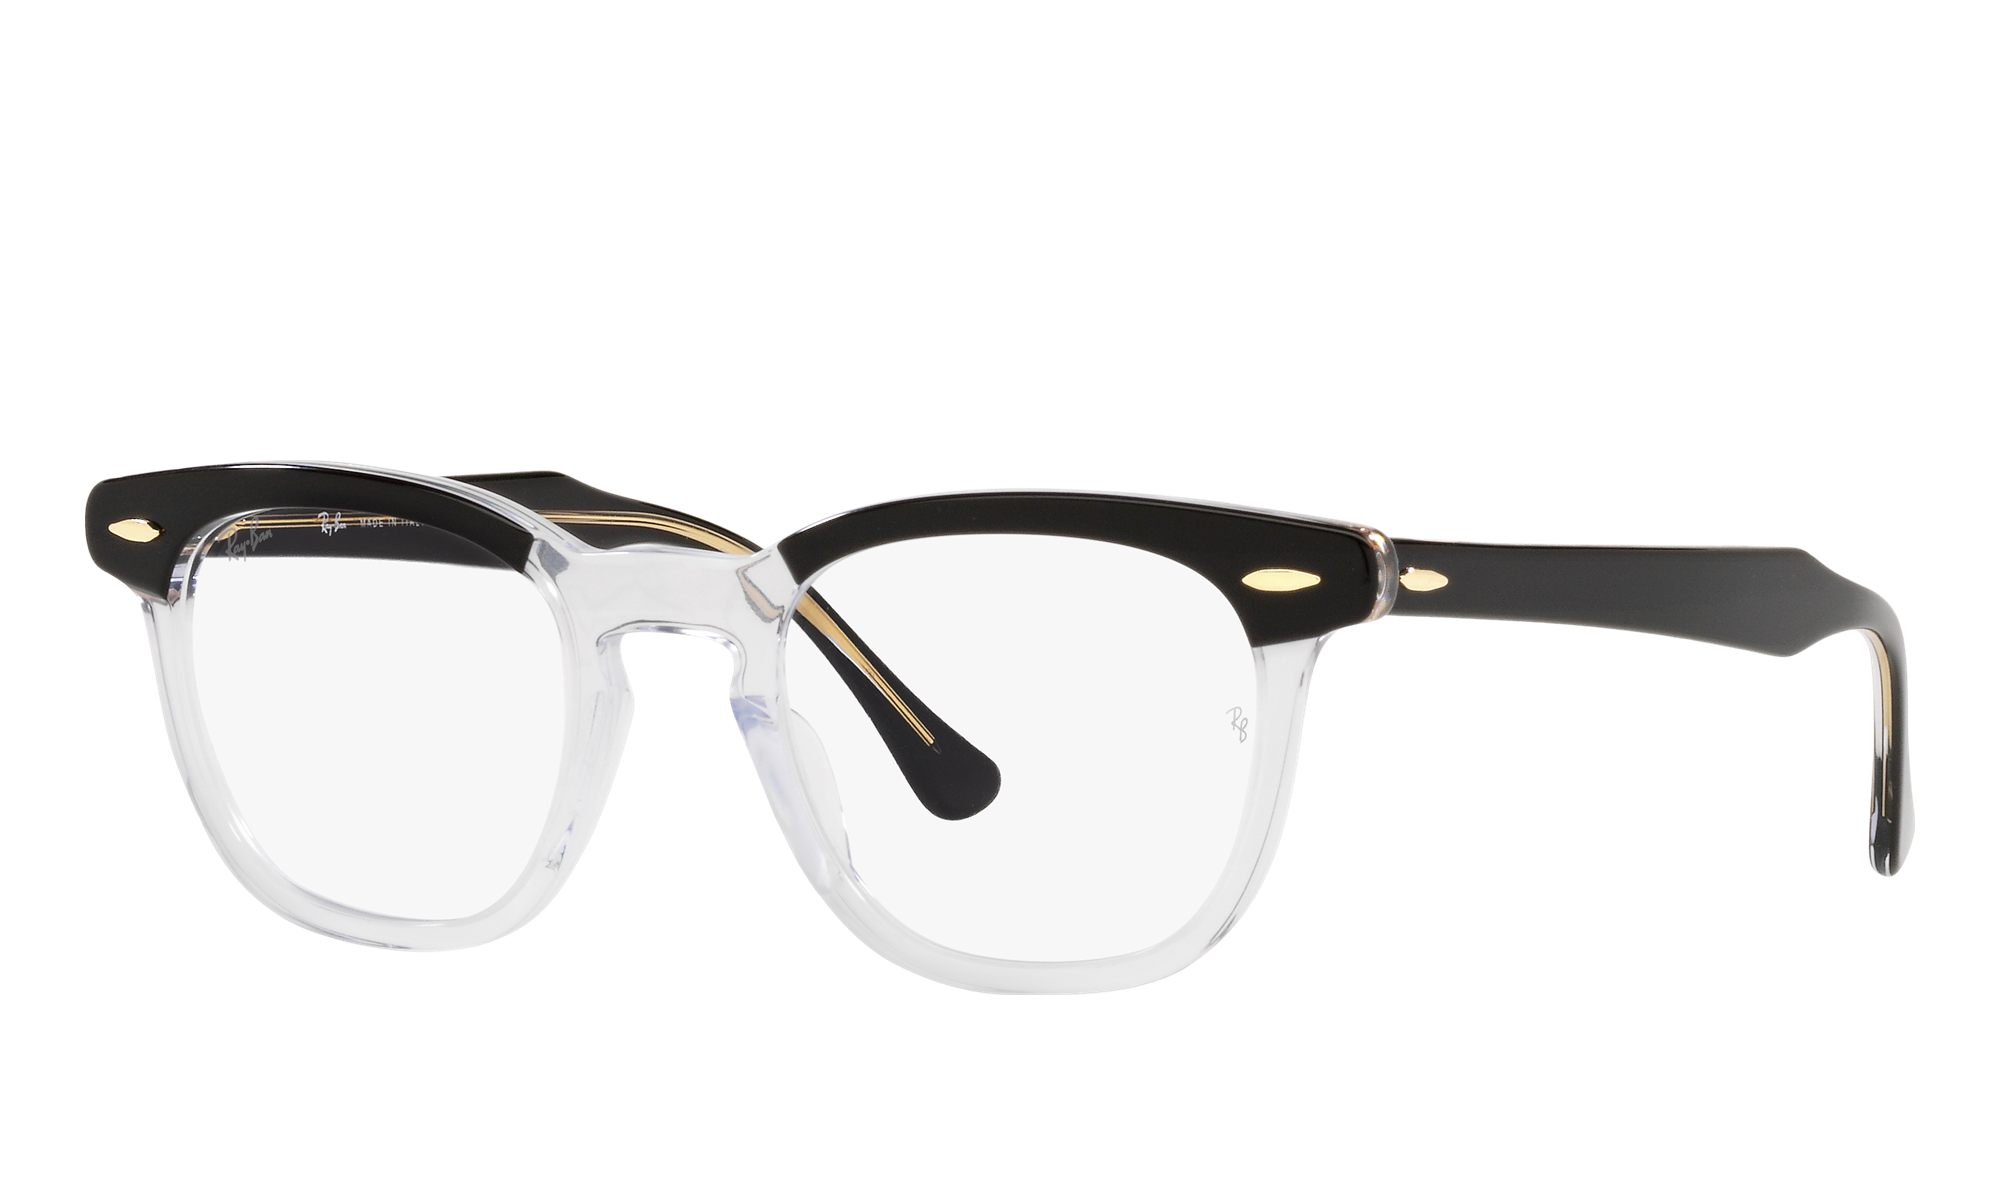 Ray-Ban Unisex Rx5398 Black On Transparent Size: Extra Small